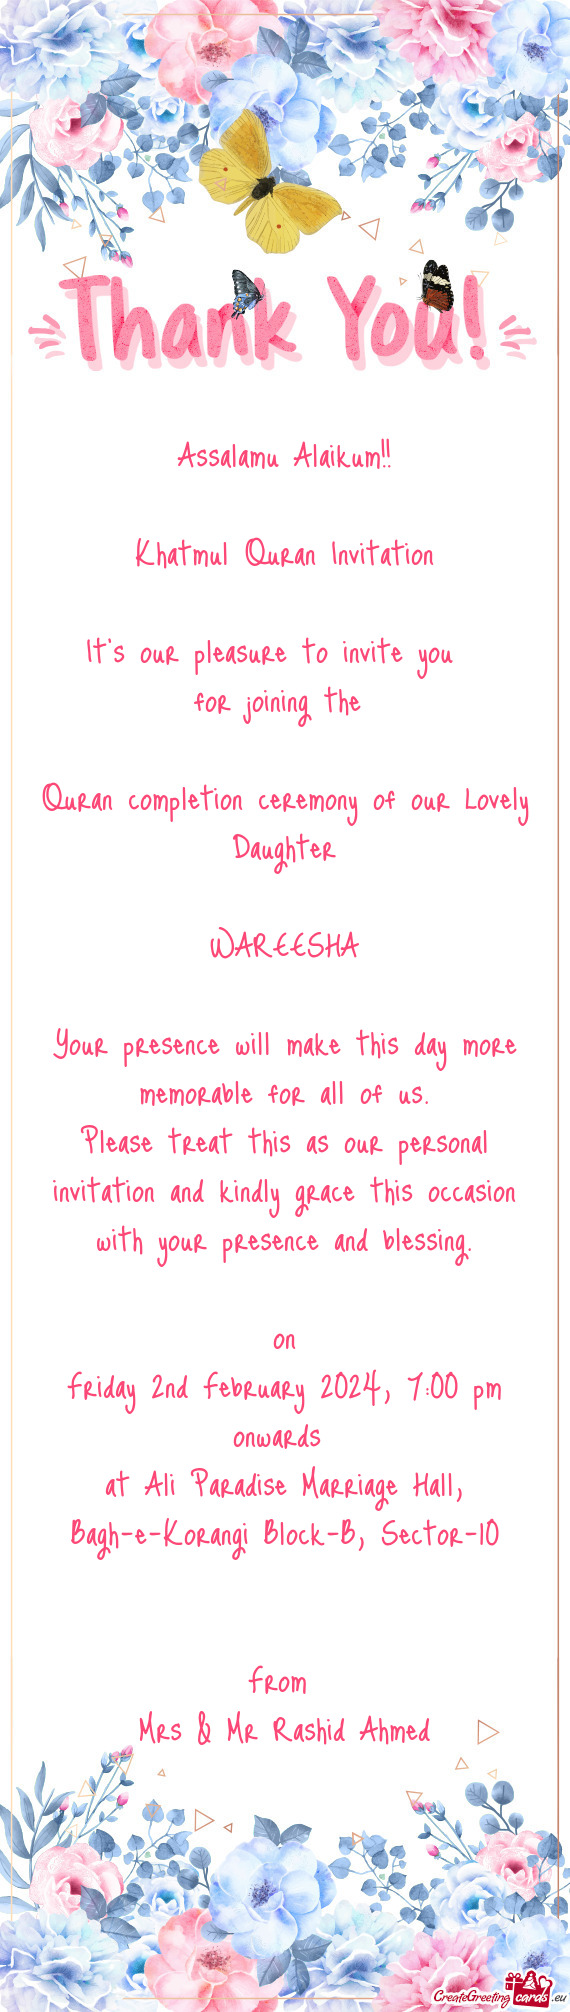 Quran completion ceremony of our Lovely Daughter WAREESHA Your presence will make this da